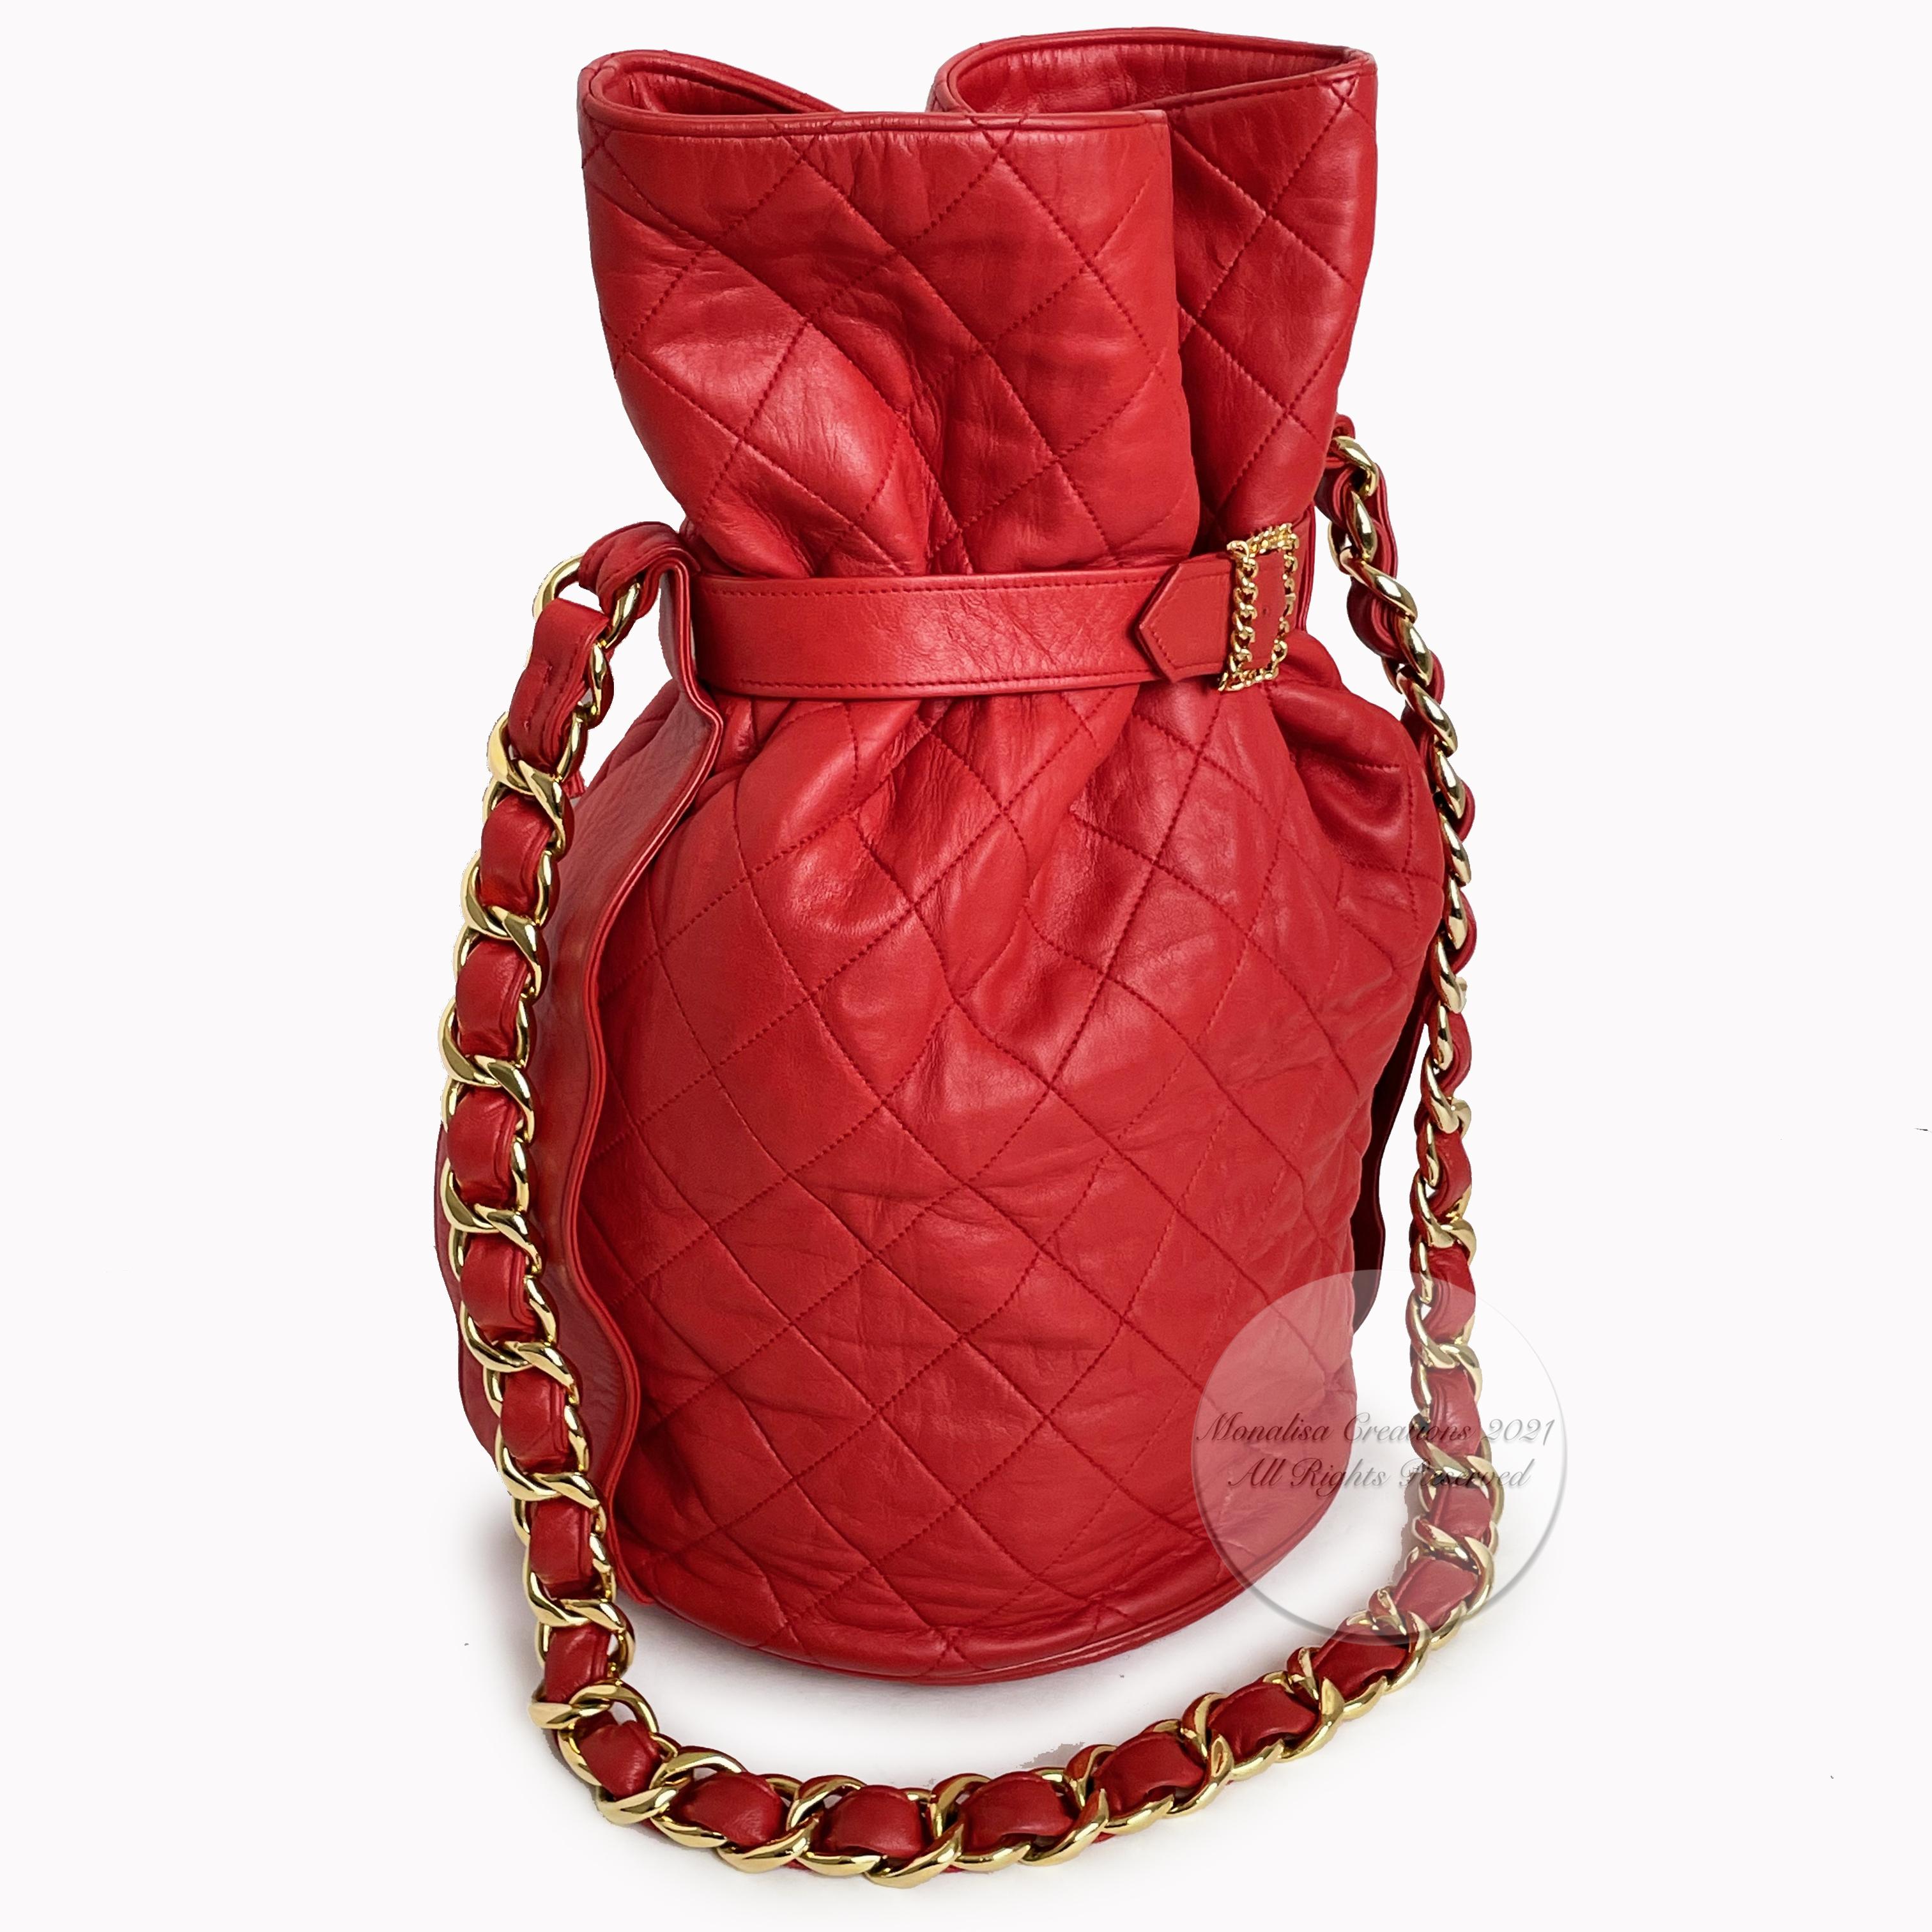 Authentic, preowned, vintage Chanel Buckle Bag with chain strap in brilliant red matelasse leather, circa the 90s.  An incredibly rare bag in an equally hard to find color.  If you search old videos of Chanel's Fall/Winter '92 RTW collection, you'll